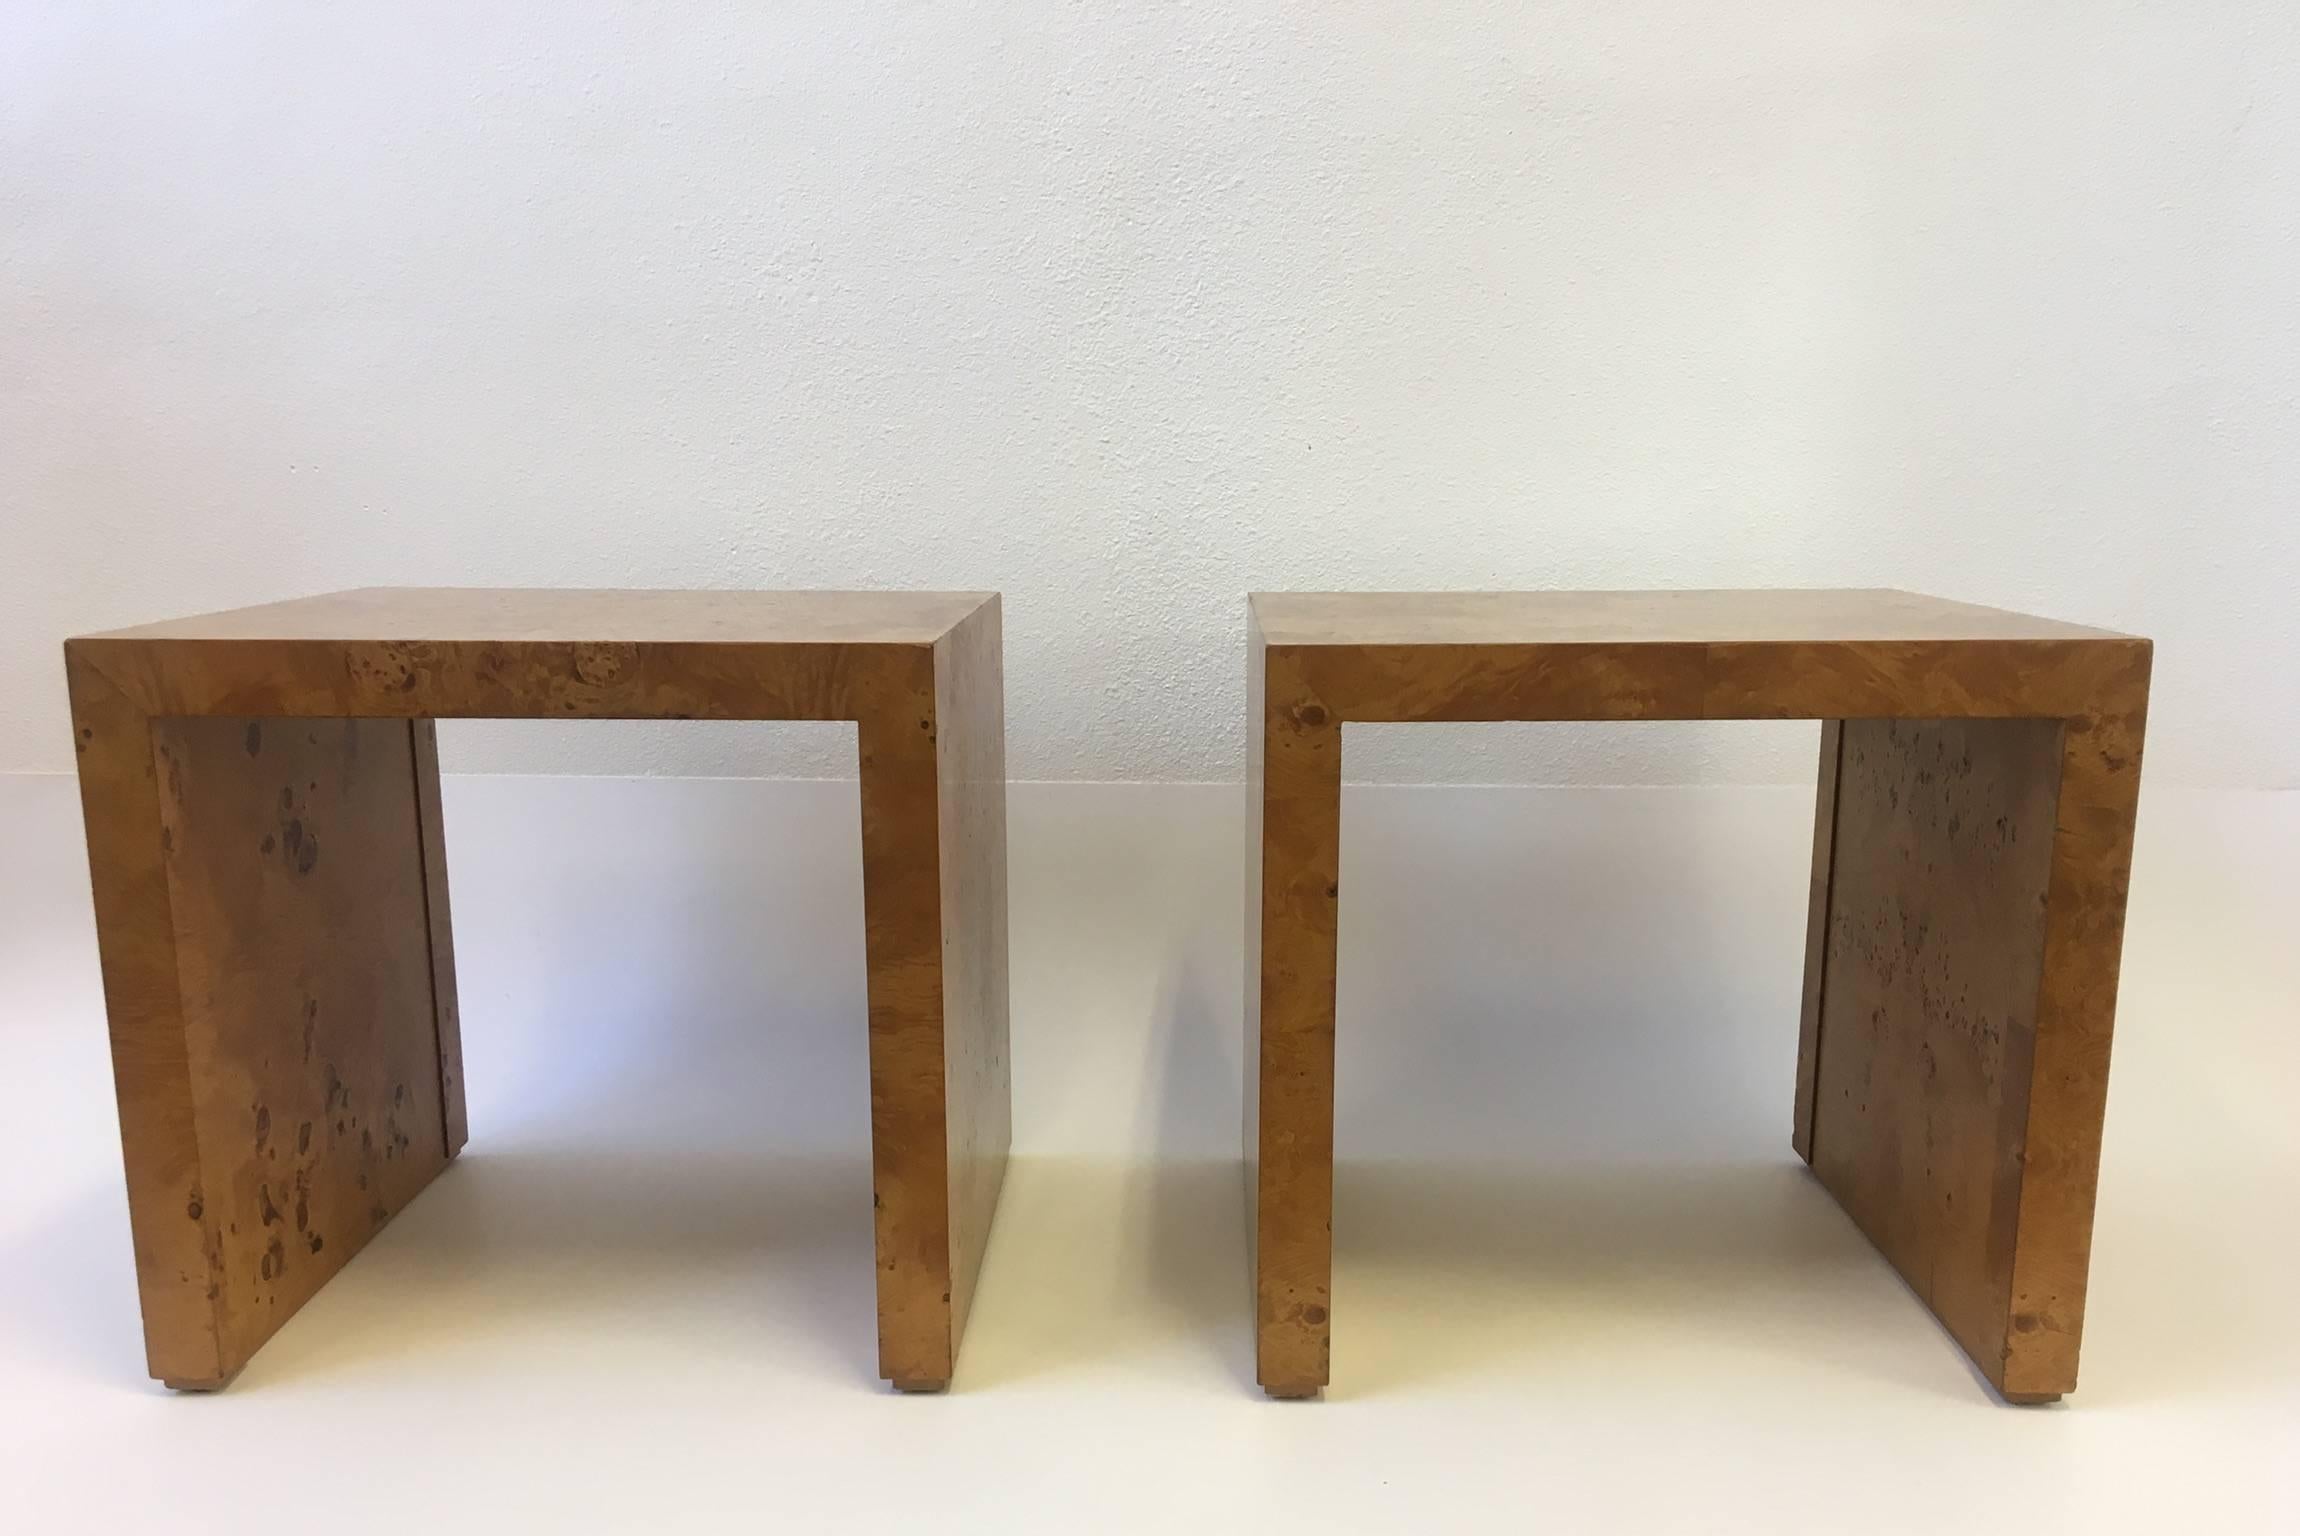 A simple but elegant pair of burl wood side table or nightstand, designed by Milo Baughman in the 1970s. This are in original condition.
Dimensions: 22.5 inches wide 20 inches deep 21.25 inches high.